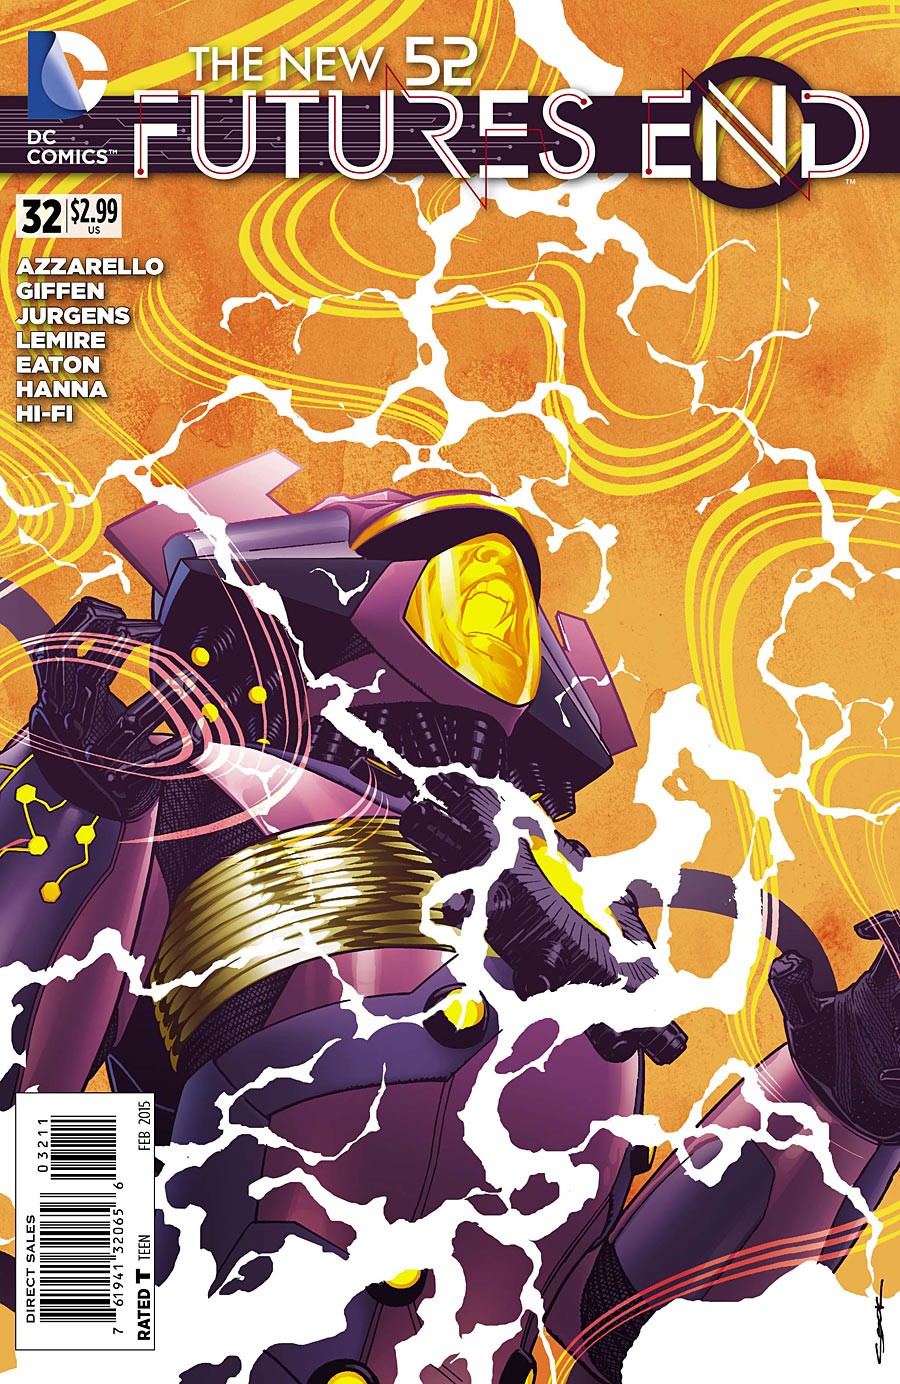 The New 52: Futures End Vol. 1 #32